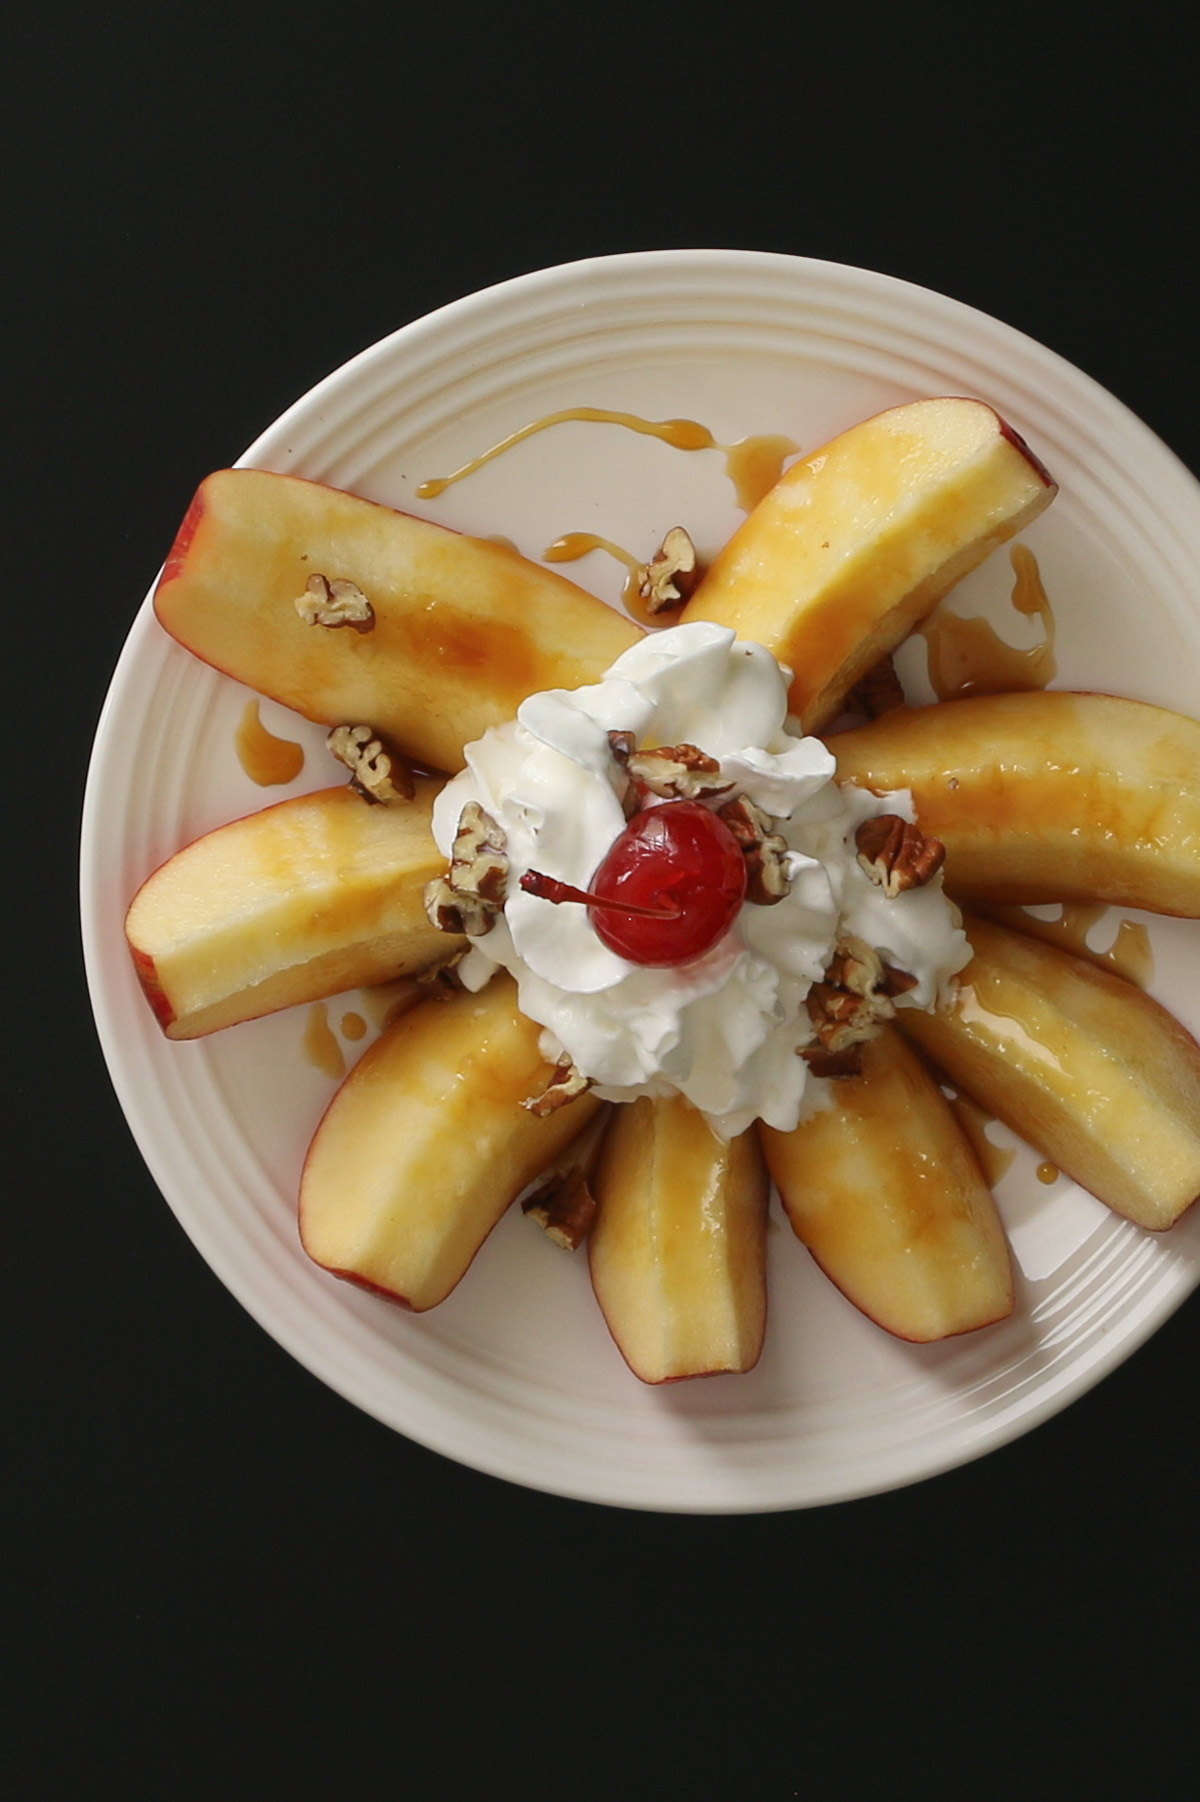 overhead shot of apple slices in a round with whipped cream, caramel, nuts, and a cherry on top, all on a rimmed white plate on a black table.